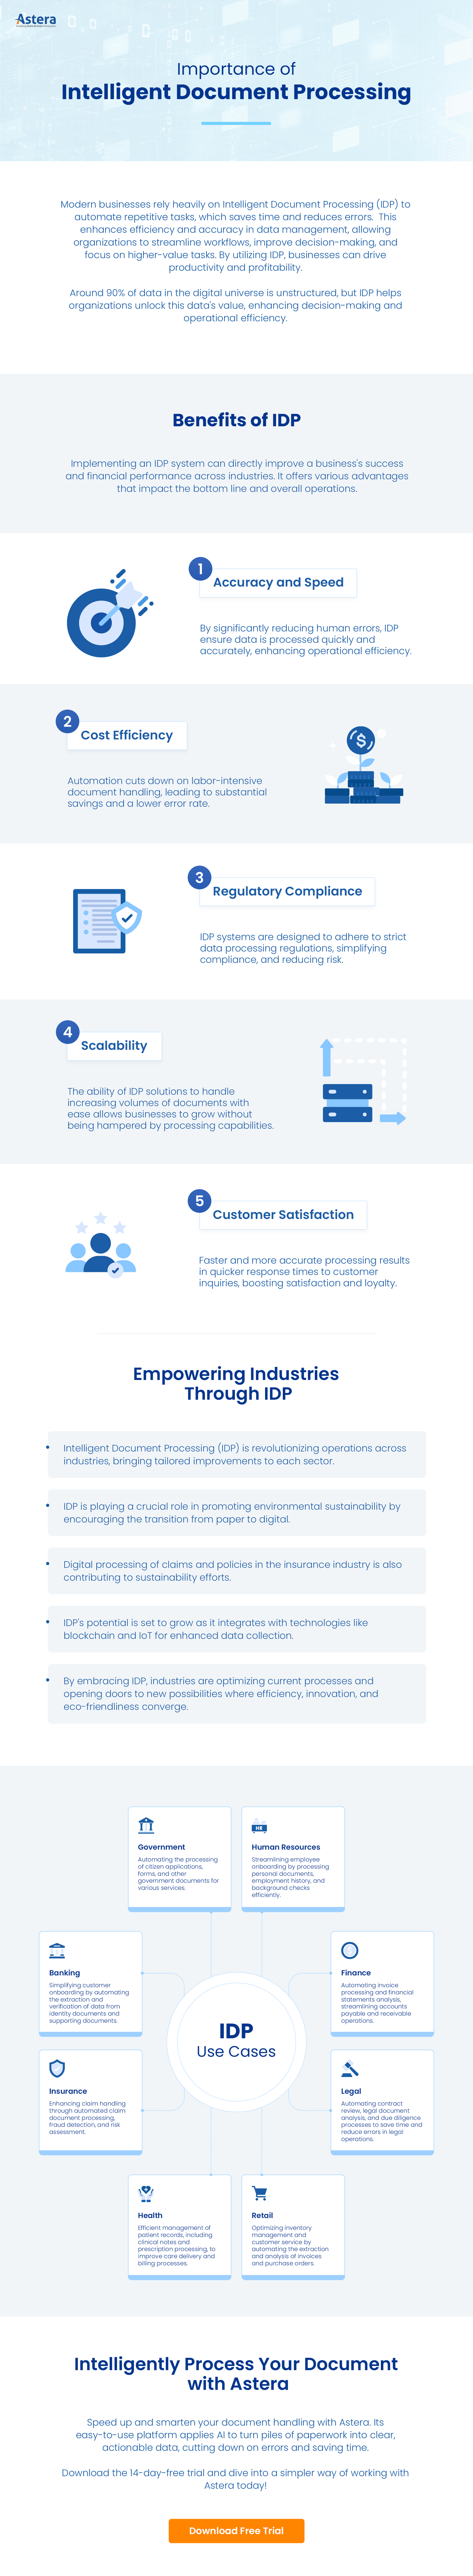 Infographic showing the importance, benefit and use cases of IDP (Intelligent Document Processing)